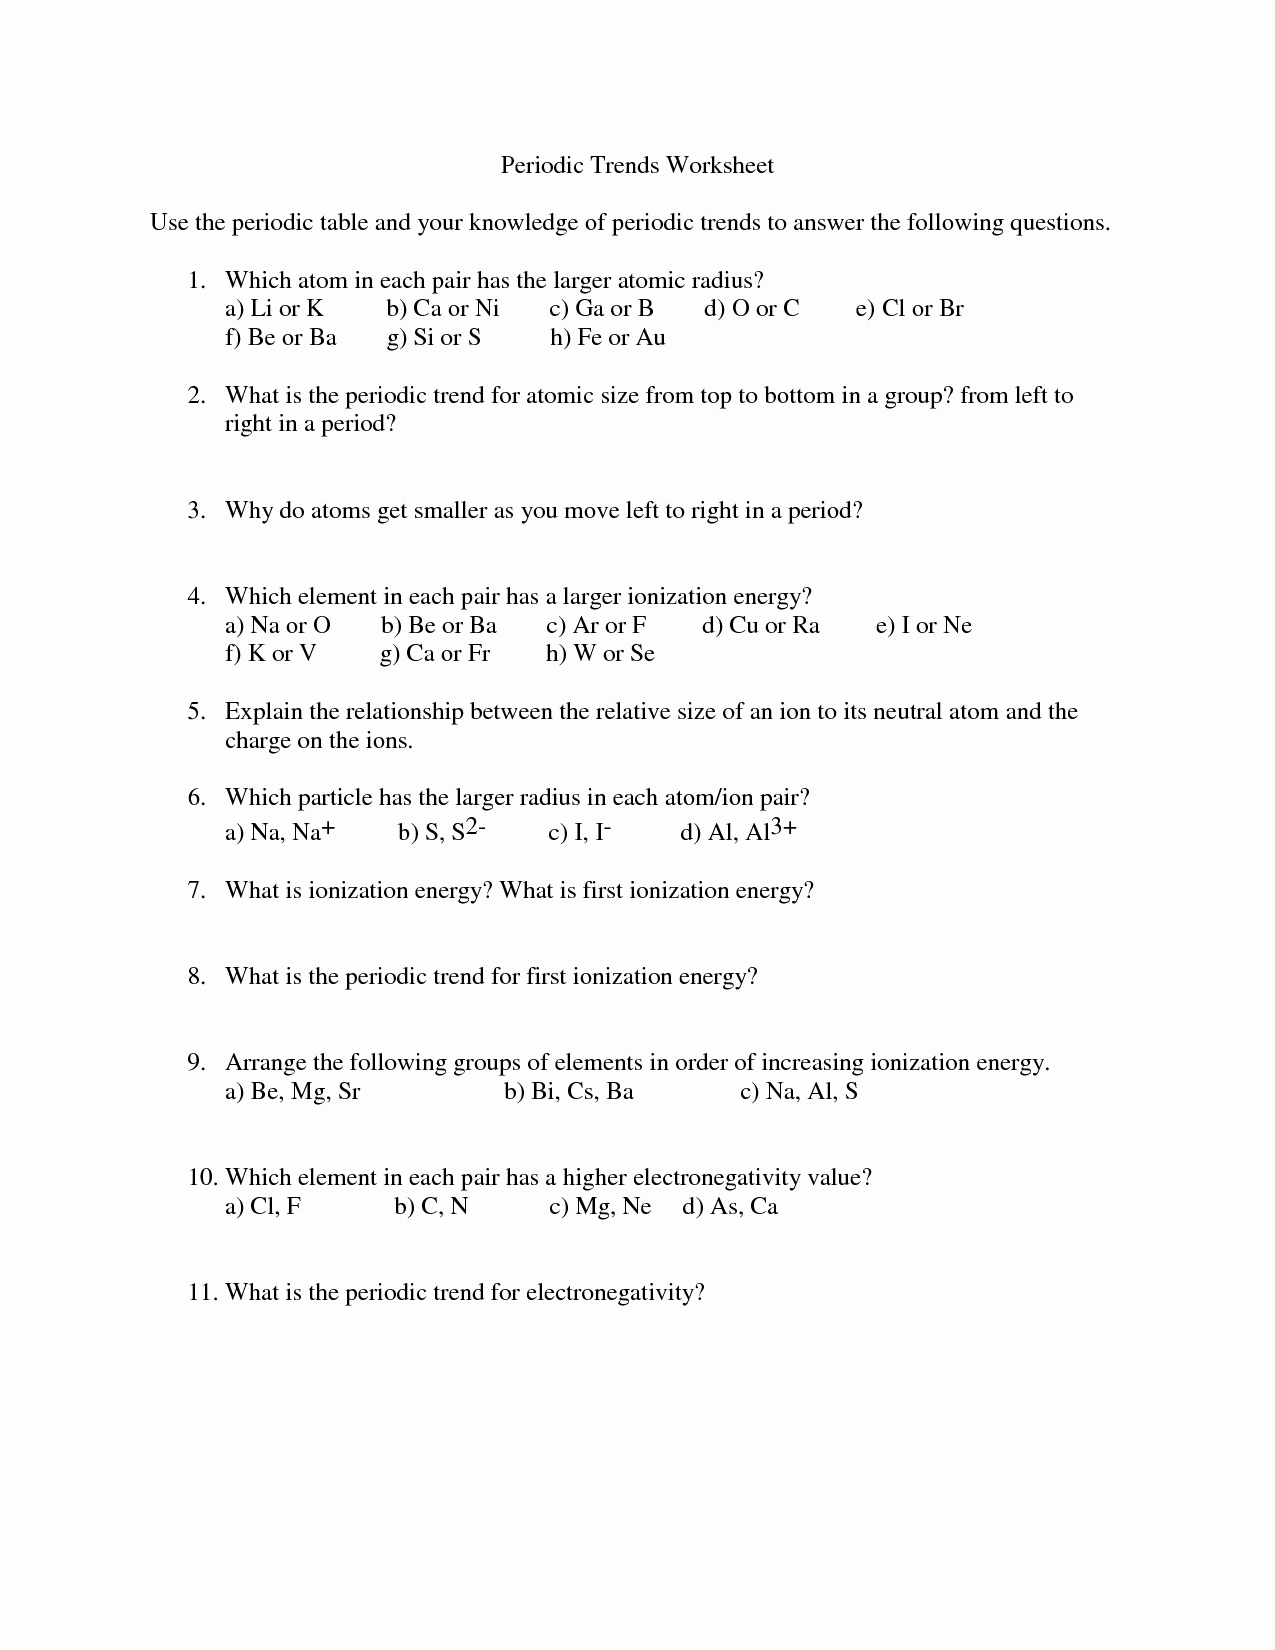 Worksheet Periodic Trends Answers Beautiful 20 Best Of Periodic Trends Worksheet Answers Key